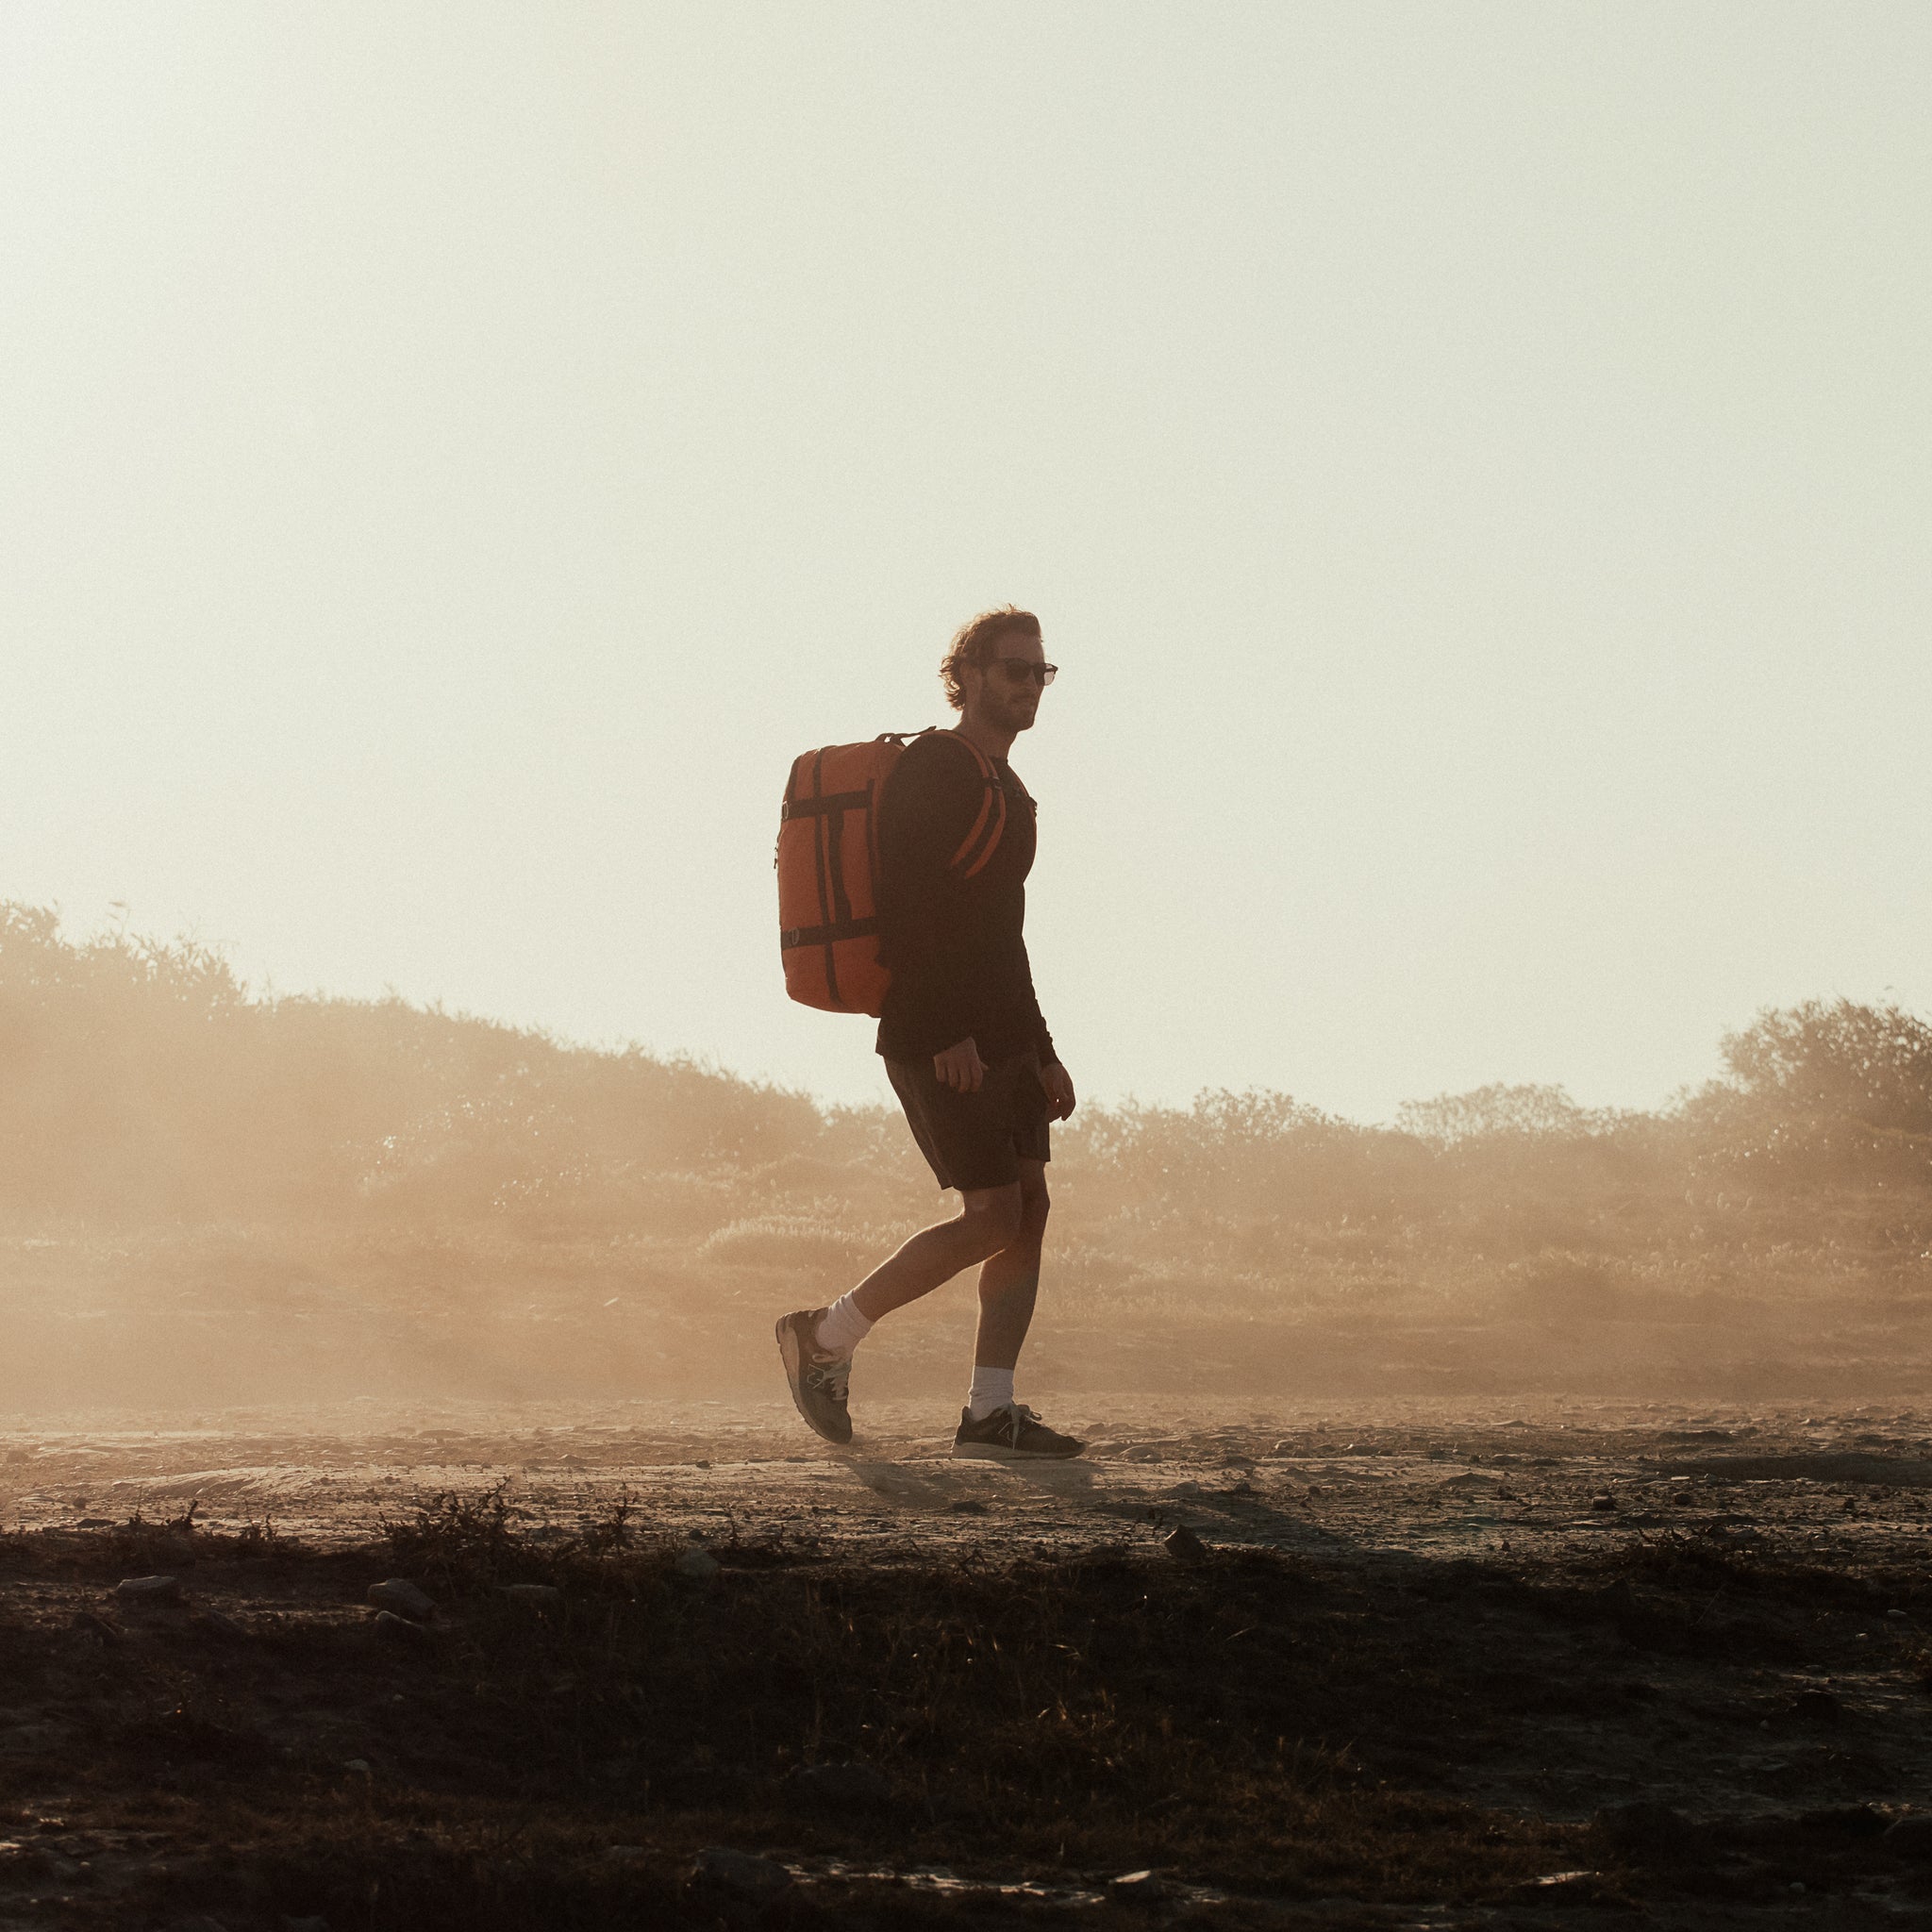 A man walking with an Adventure Bag in Ember Orange, shot from the side.